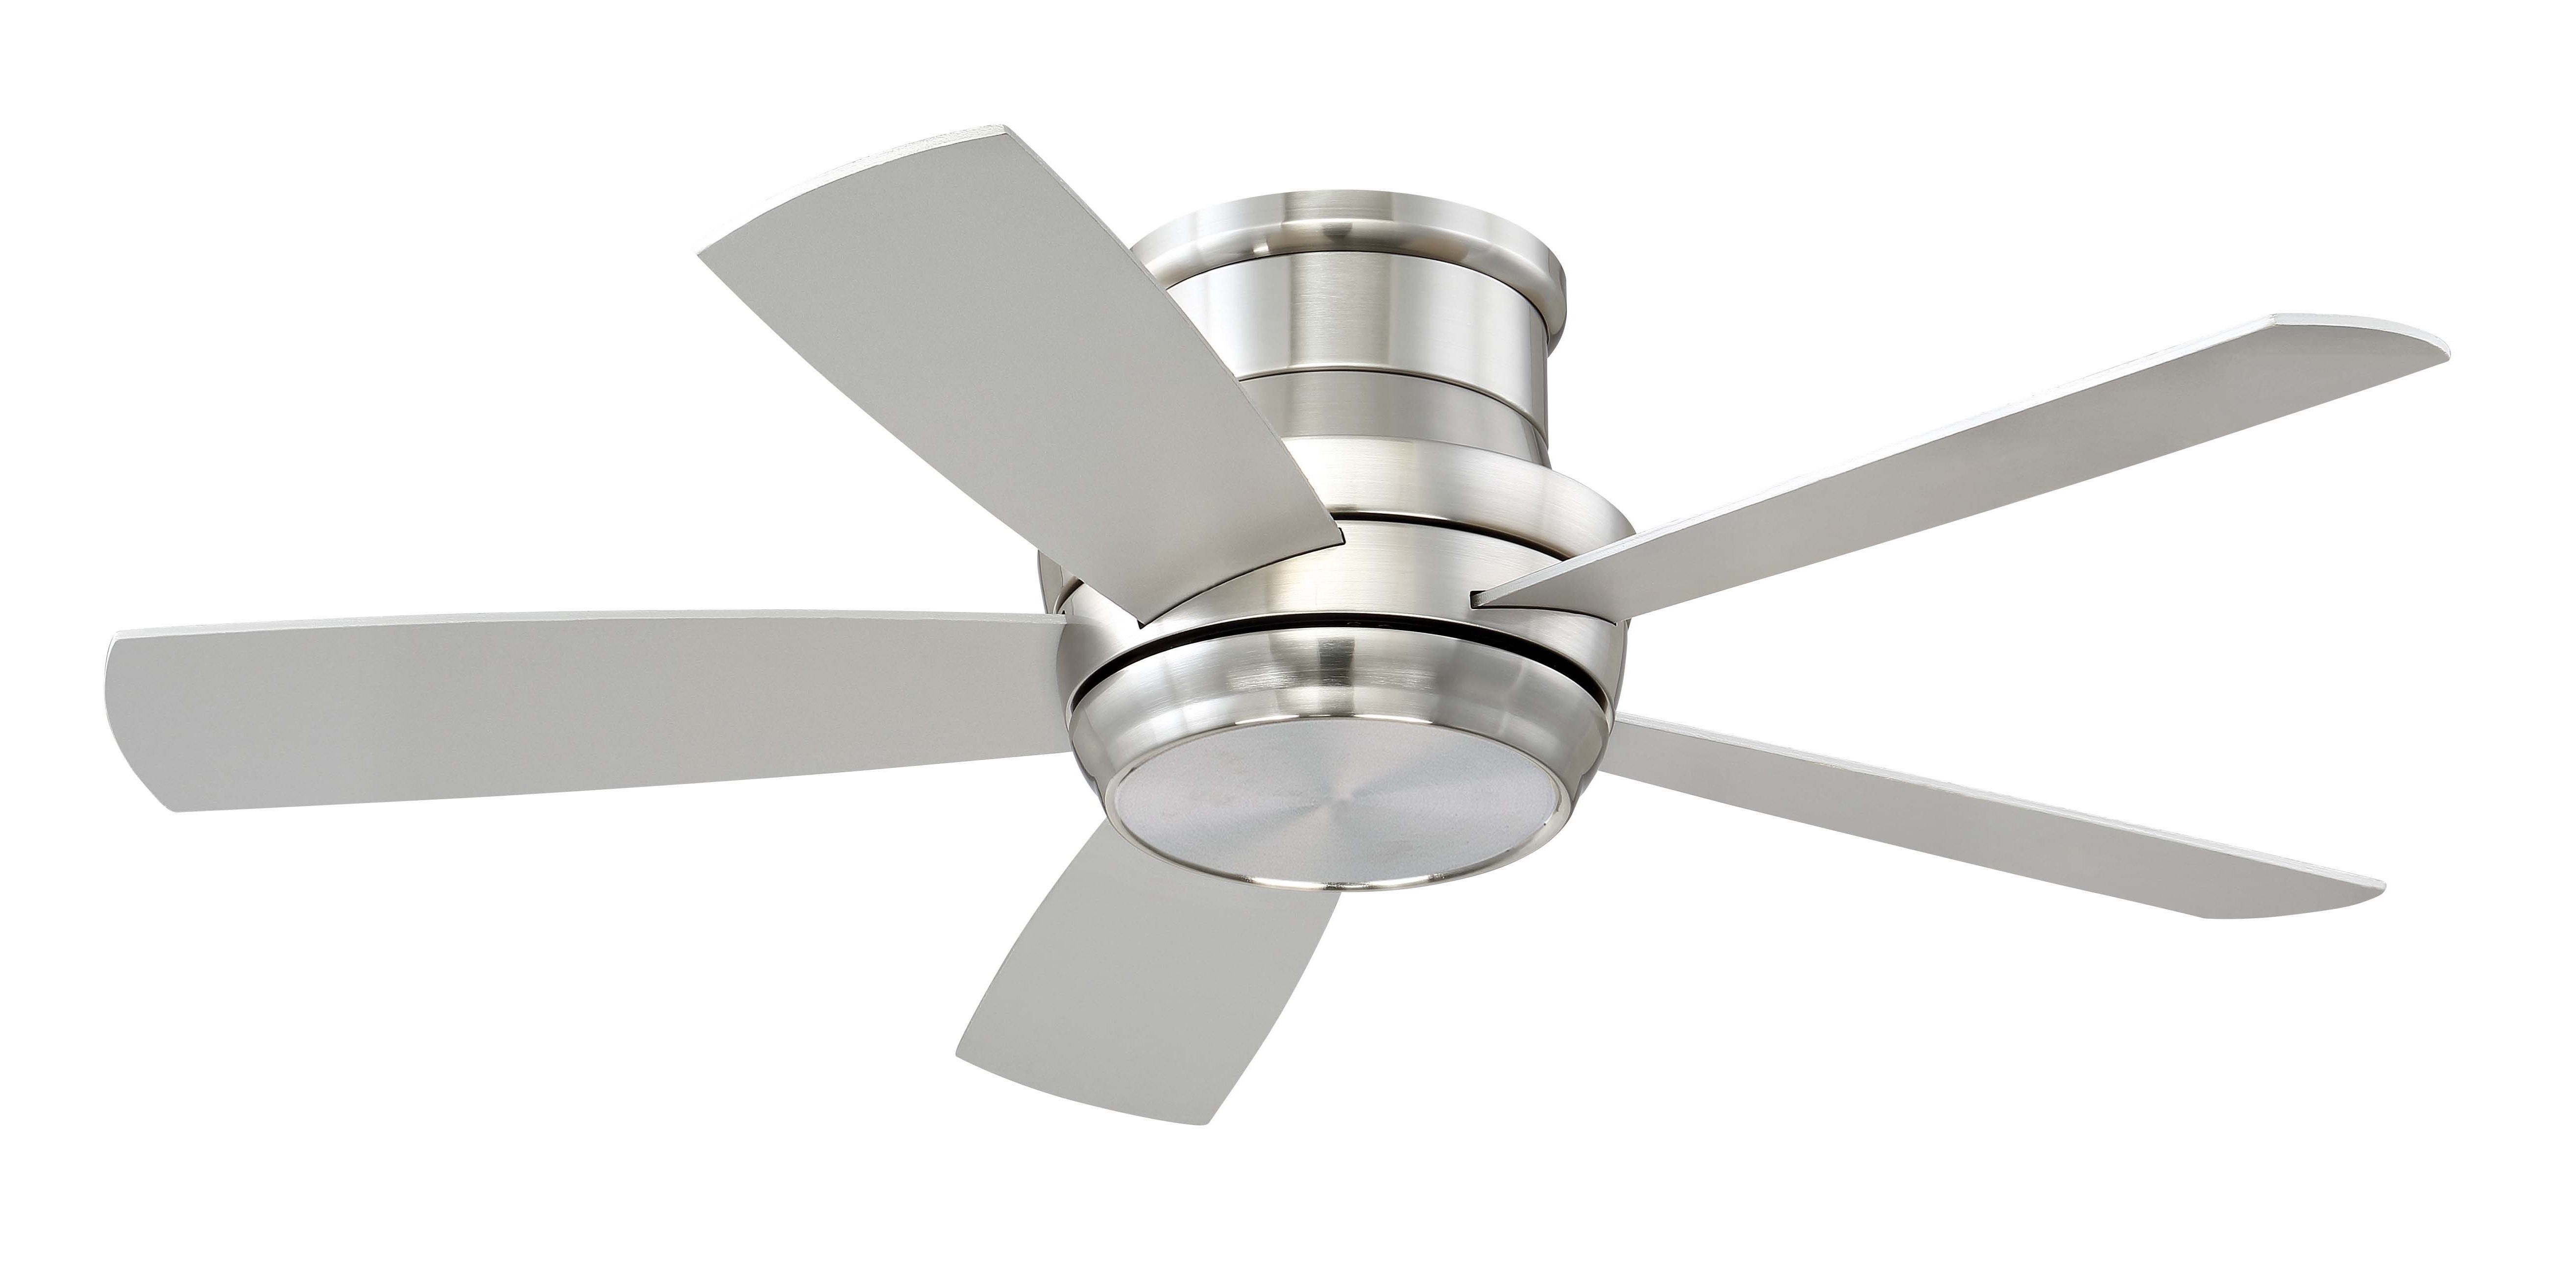 Cedarton Hugger 5 Blade Led Ceiling Fans With Most Popular 44" Cedarton Hugger 5 Blade Led Ceiling Fan, Light Kit Included (View 4 of 20)